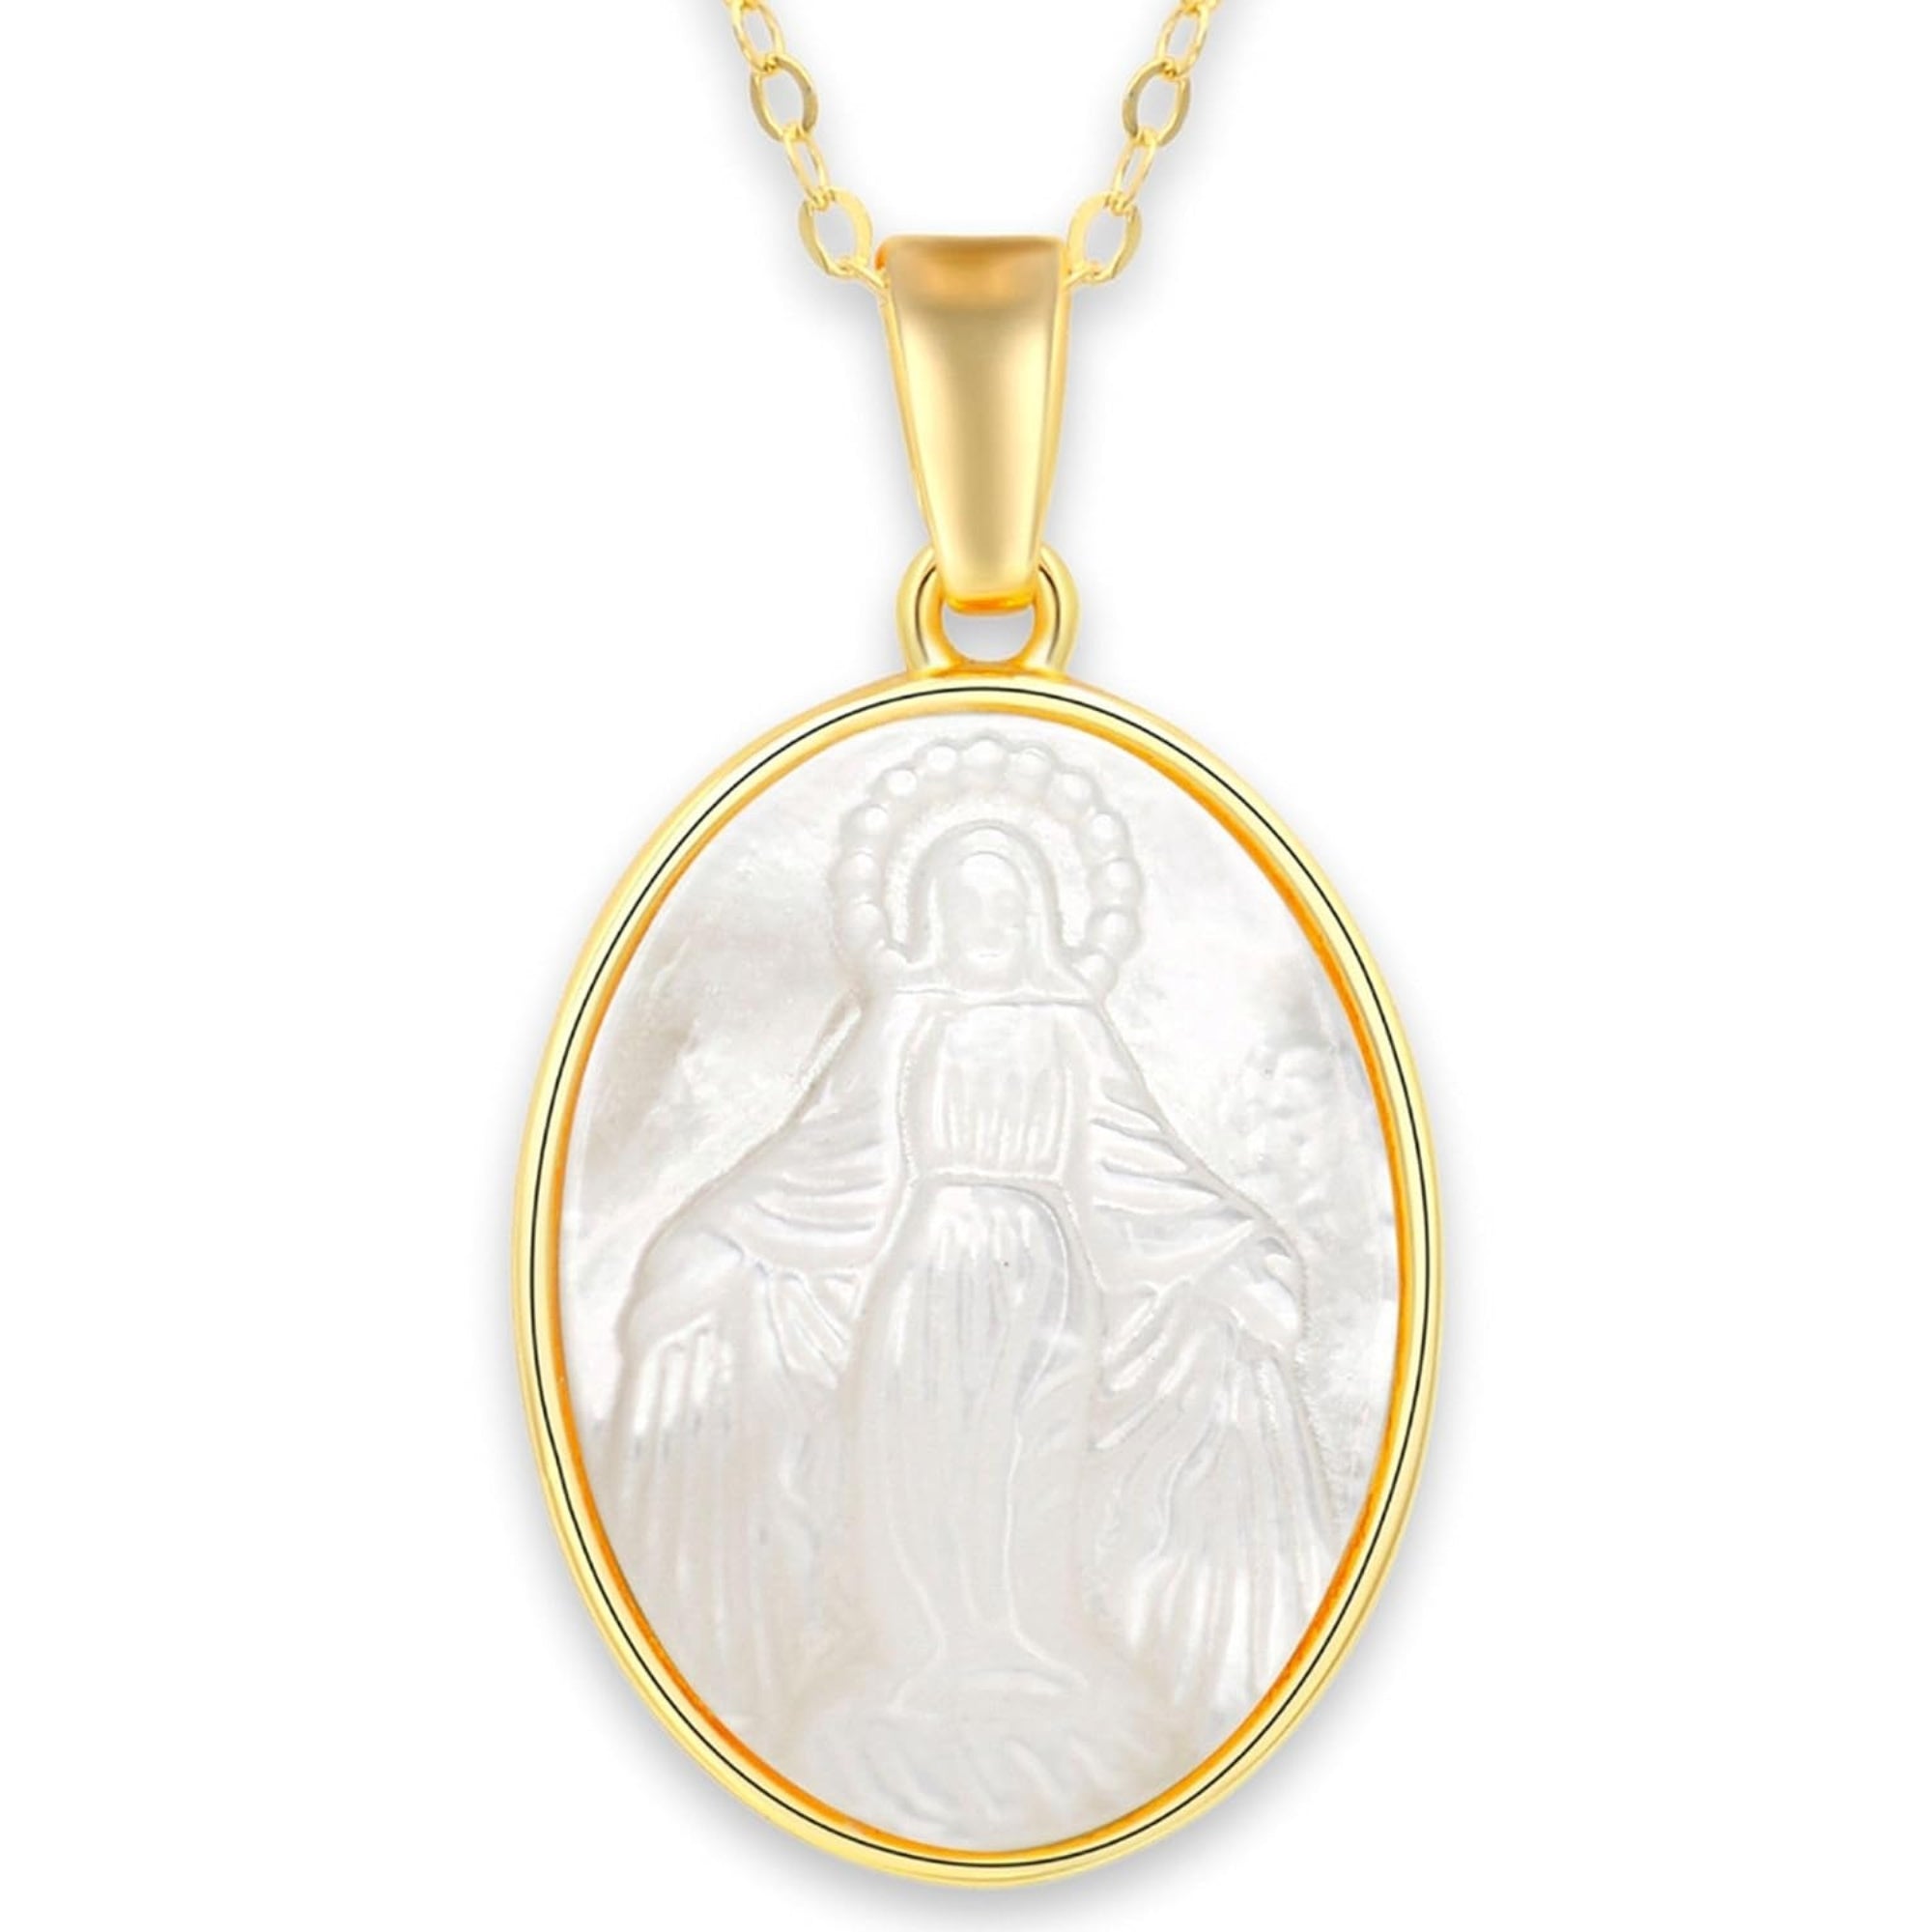 Miraculous Medals Catholic | Virgin the miraculous